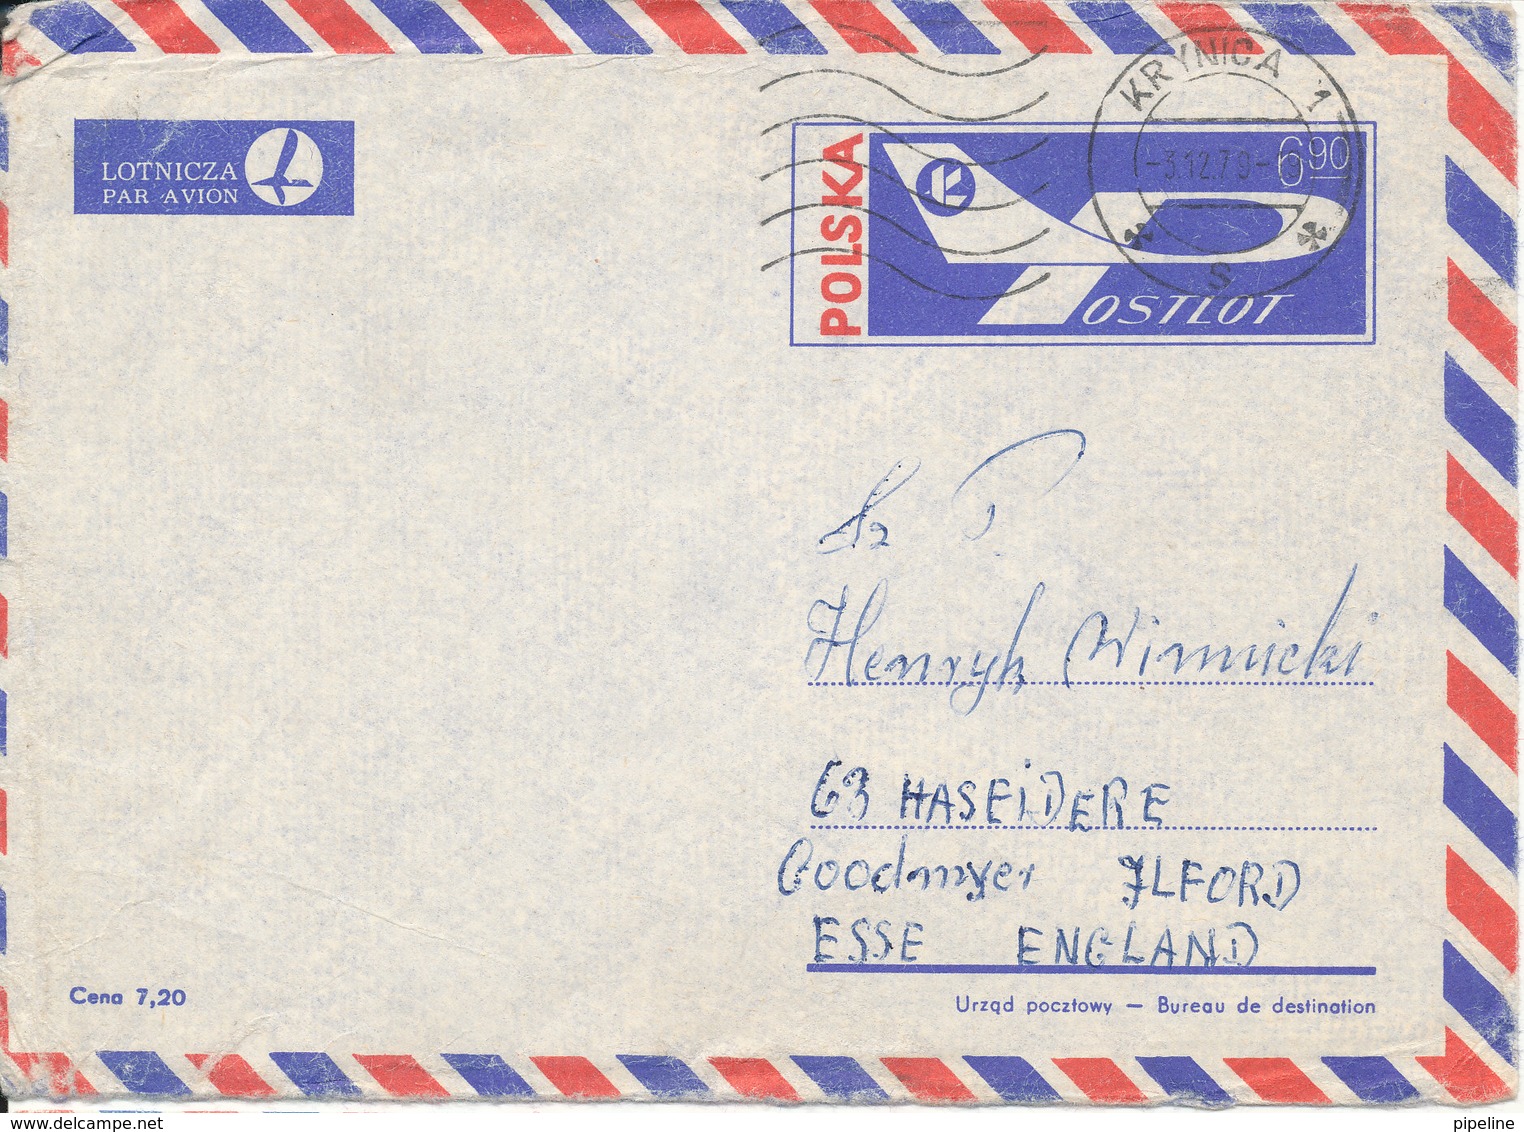 Poland Postal Stationery Cover Sent To England Krynica 3-12-1979 - Stamped Stationery